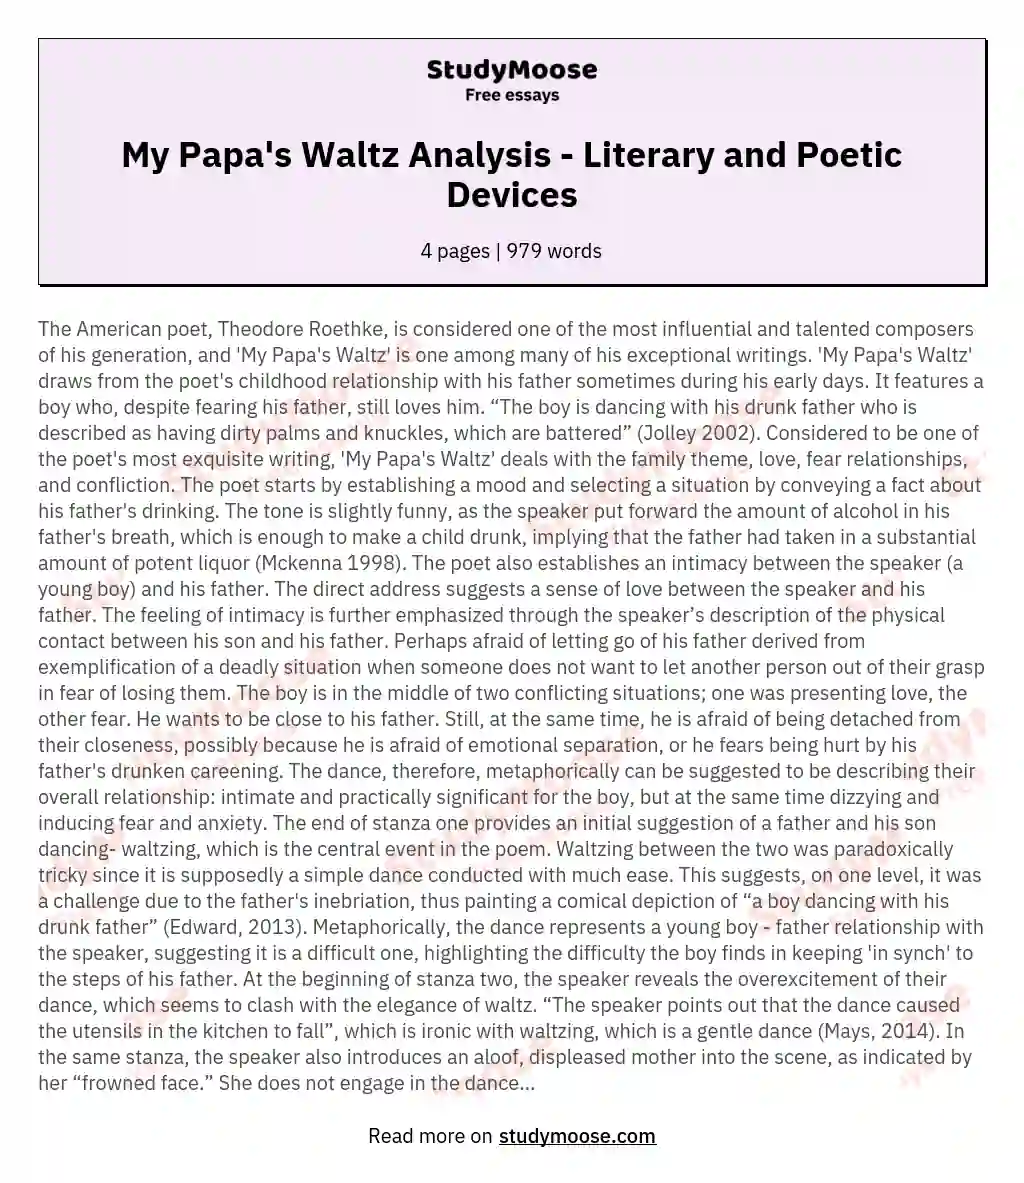 My Papa's Waltz Analysis - Literary and Poetic Devices